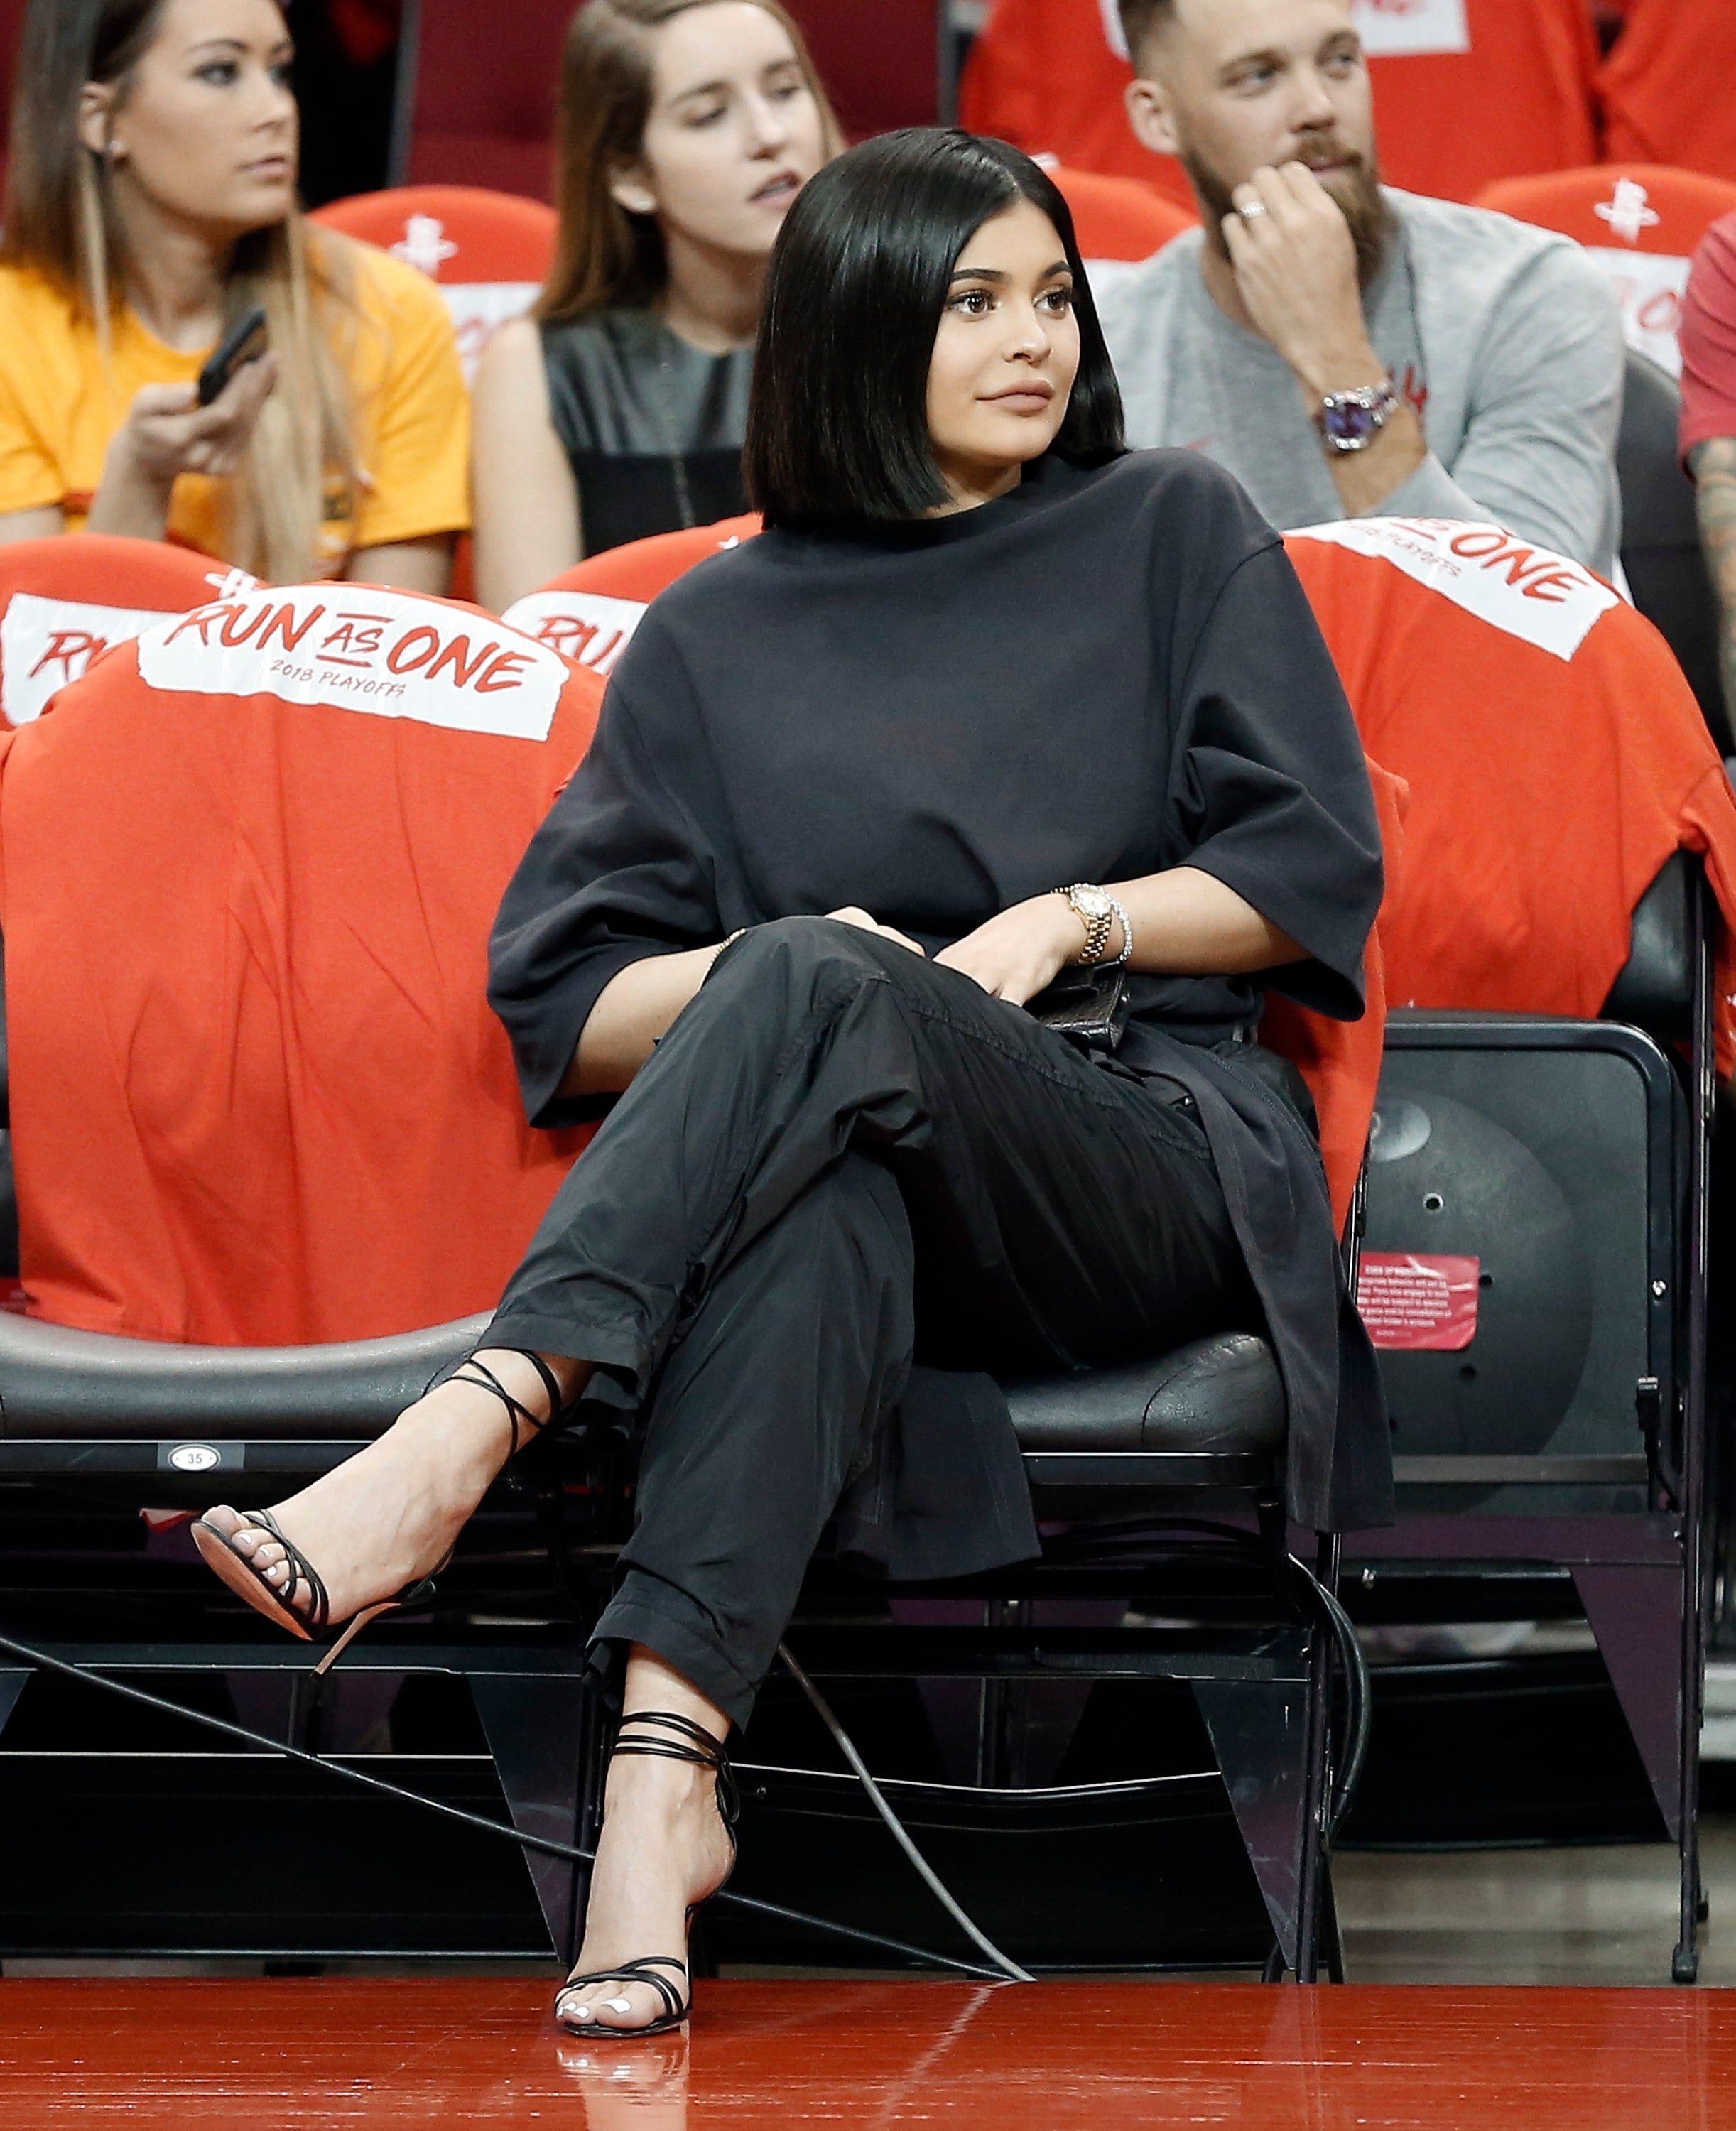 Dressed-down Kylie Jenner rocks natural look as she hits LA in oversized  outfit